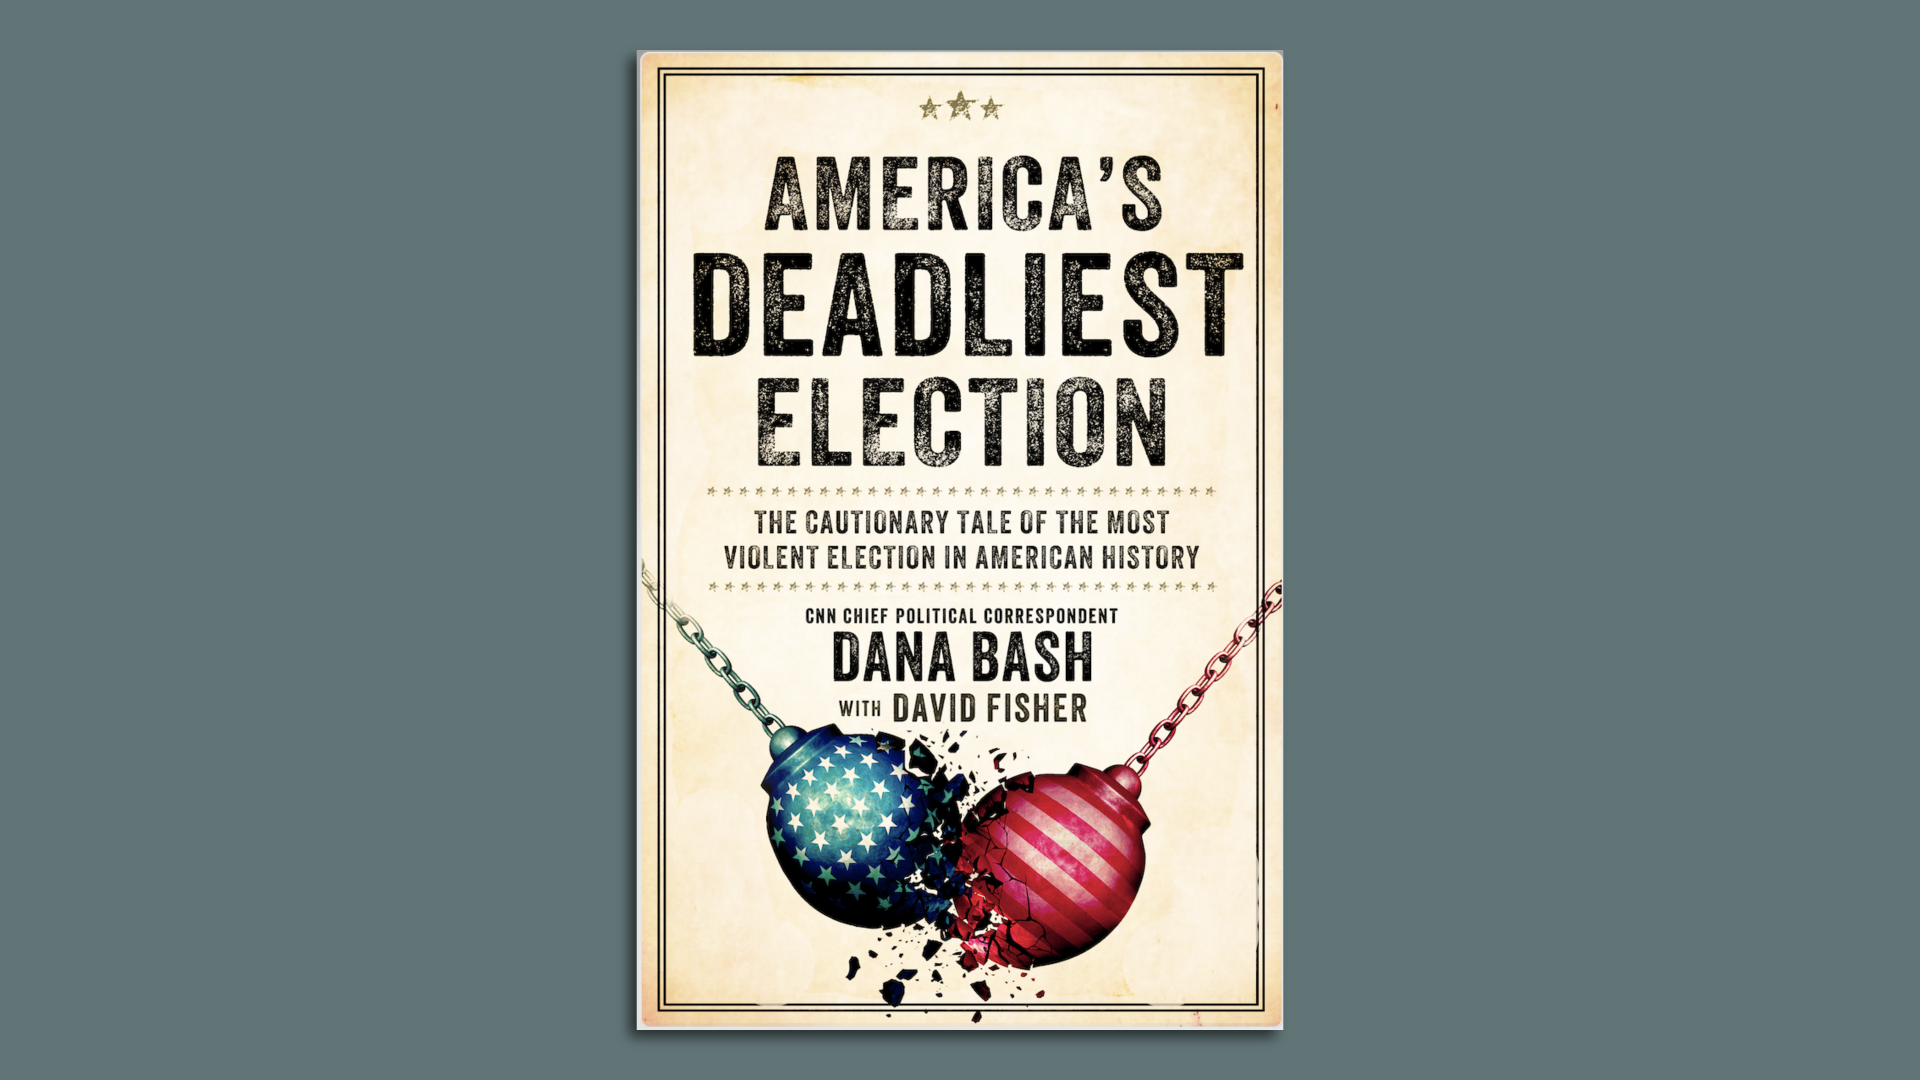 The book cover for "America's Deadliest Election" by Dana Bash